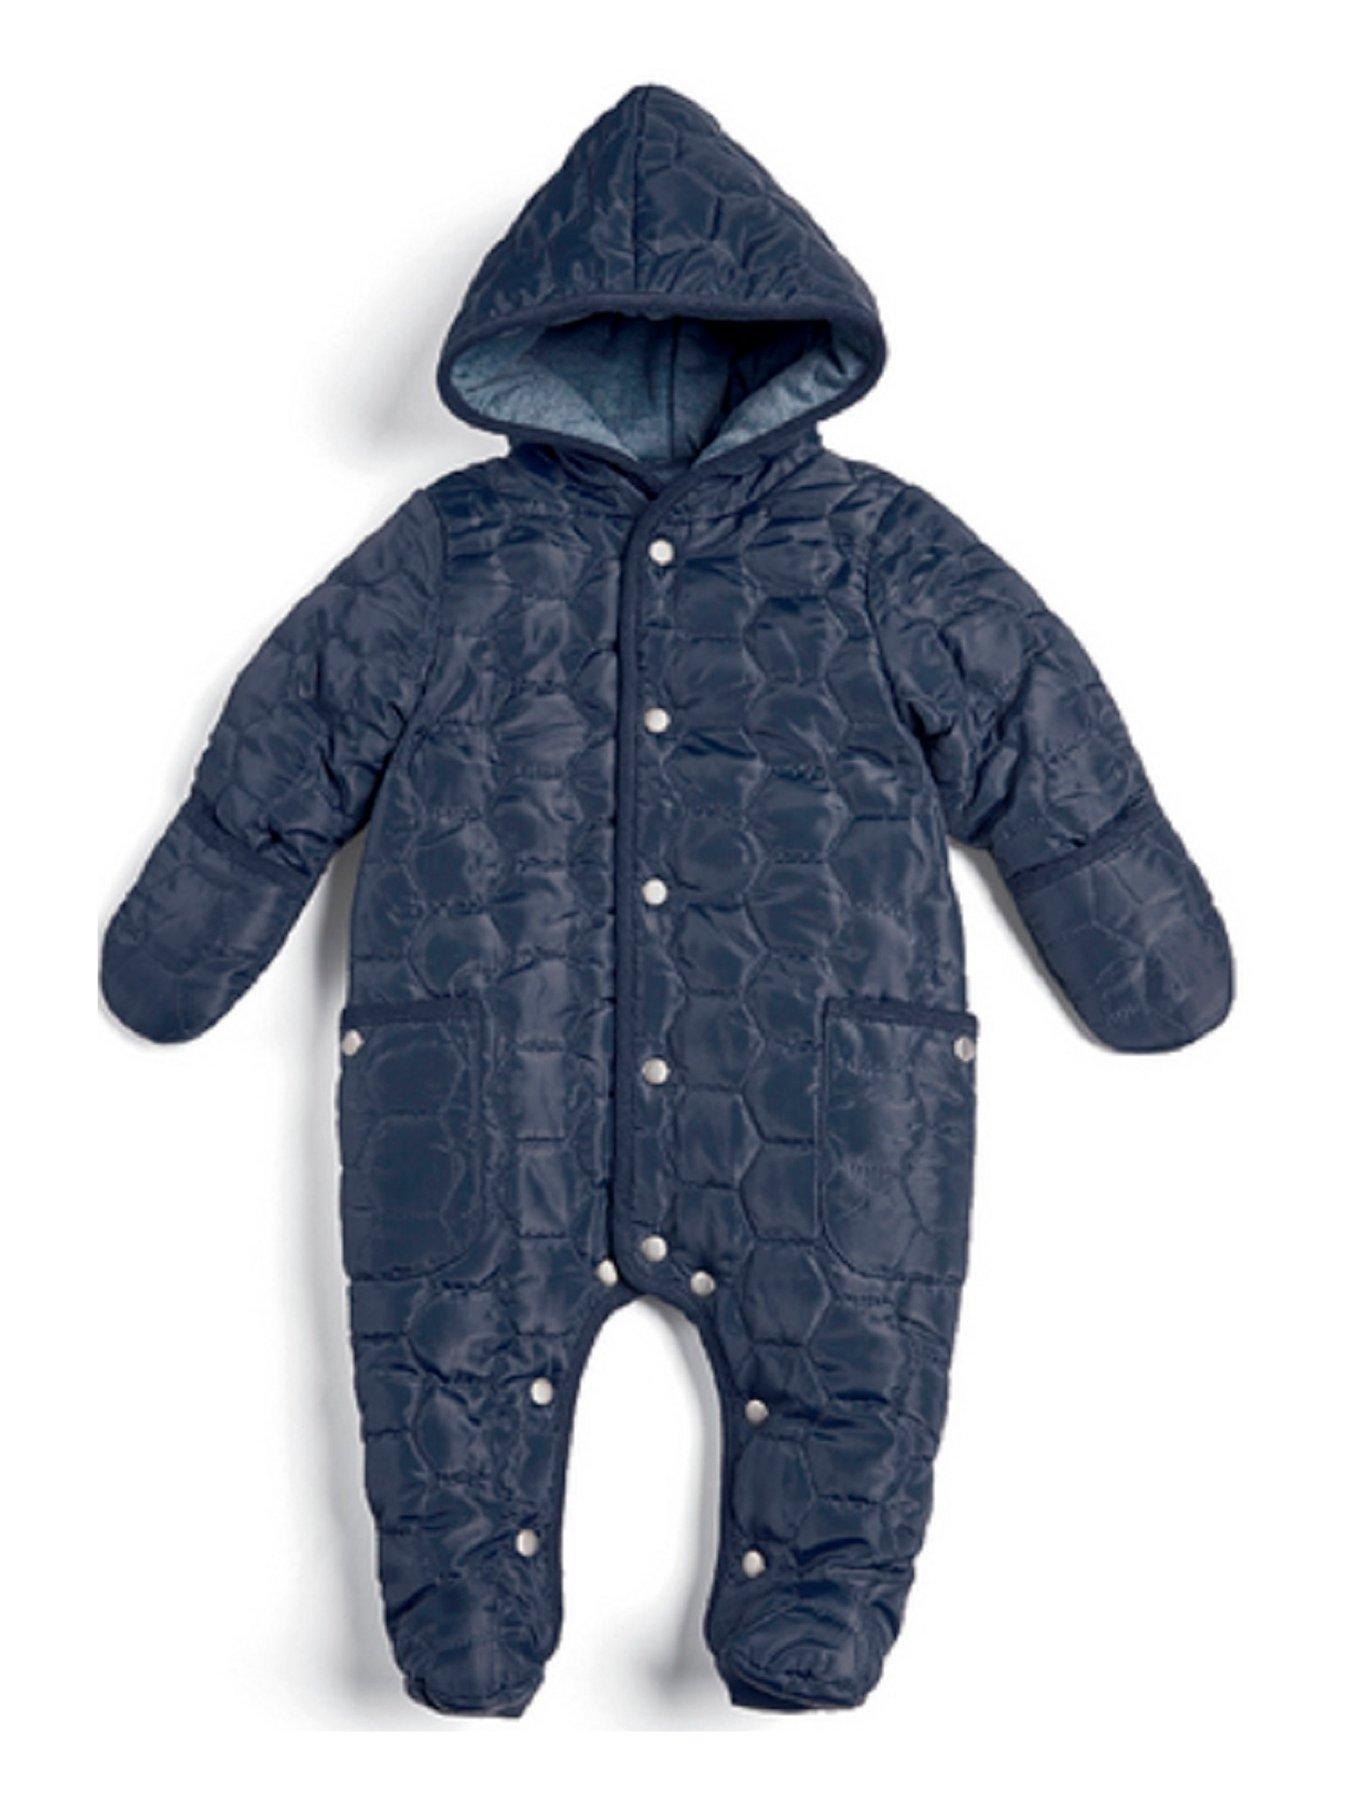 mamas and papas baby boy occasion wear